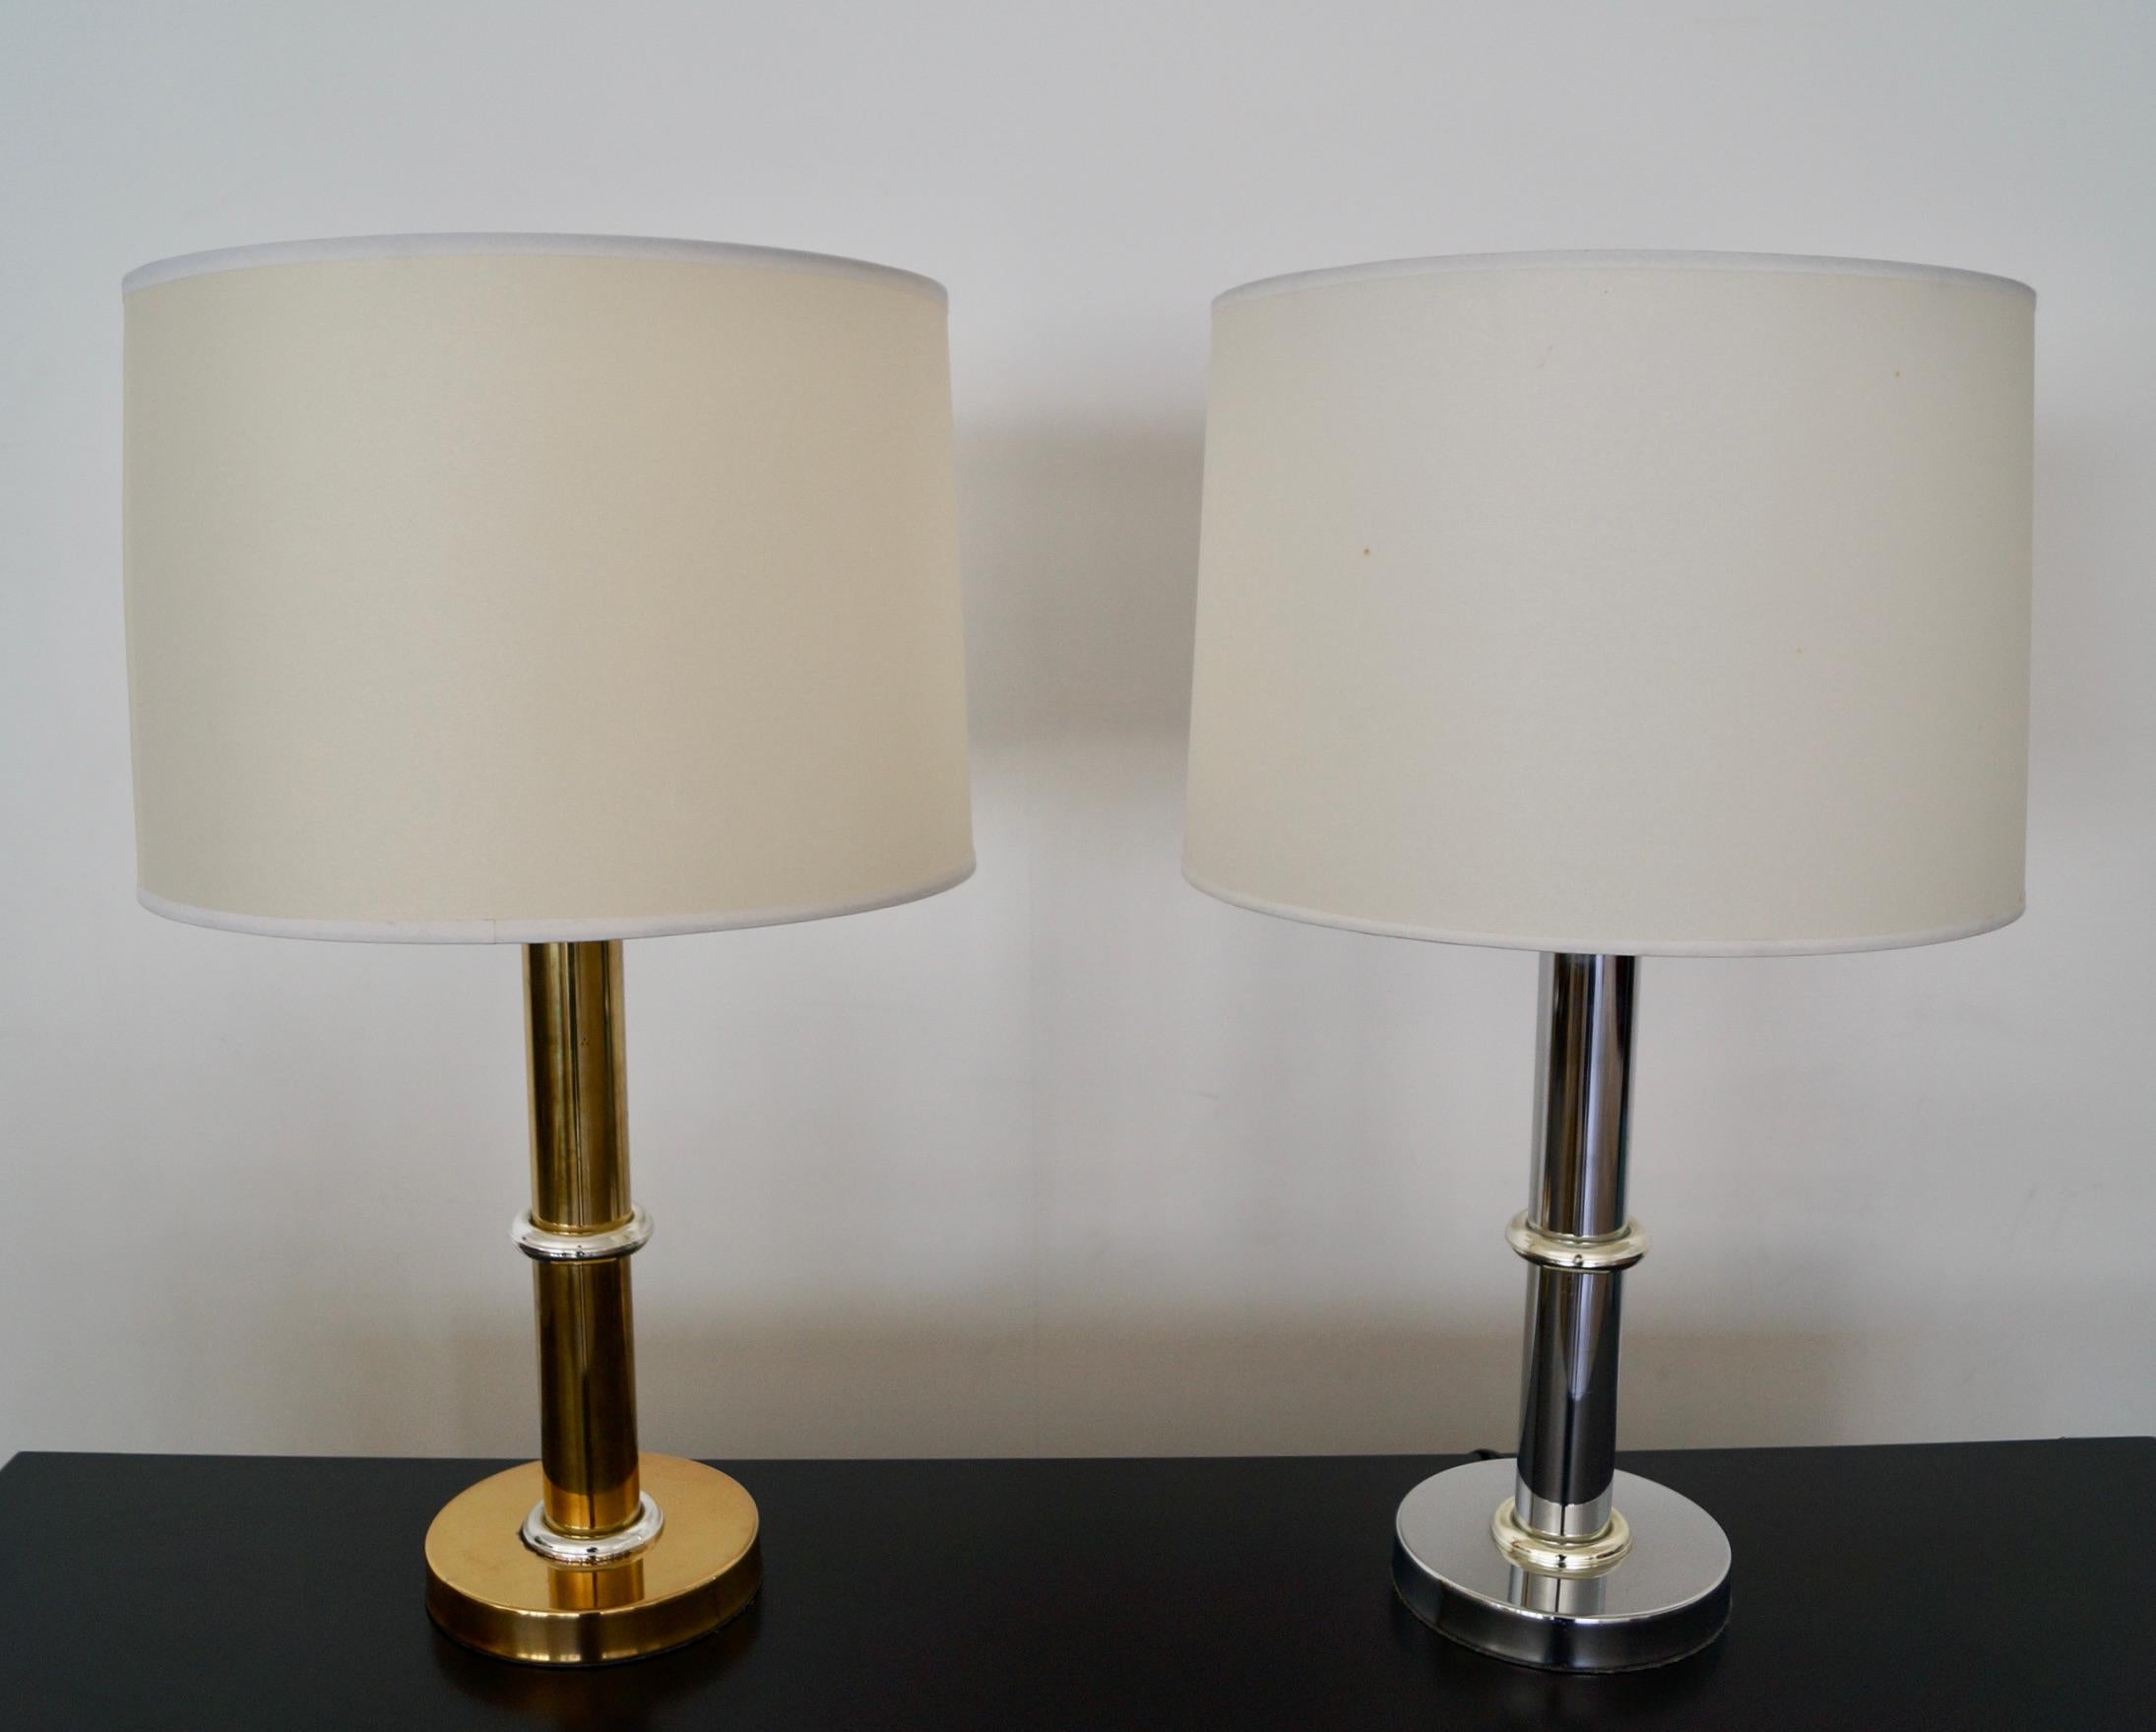 Pair of Mid-Century Modern Brass & Chrome Table Lamps In Good Condition For Sale In Burbank, CA